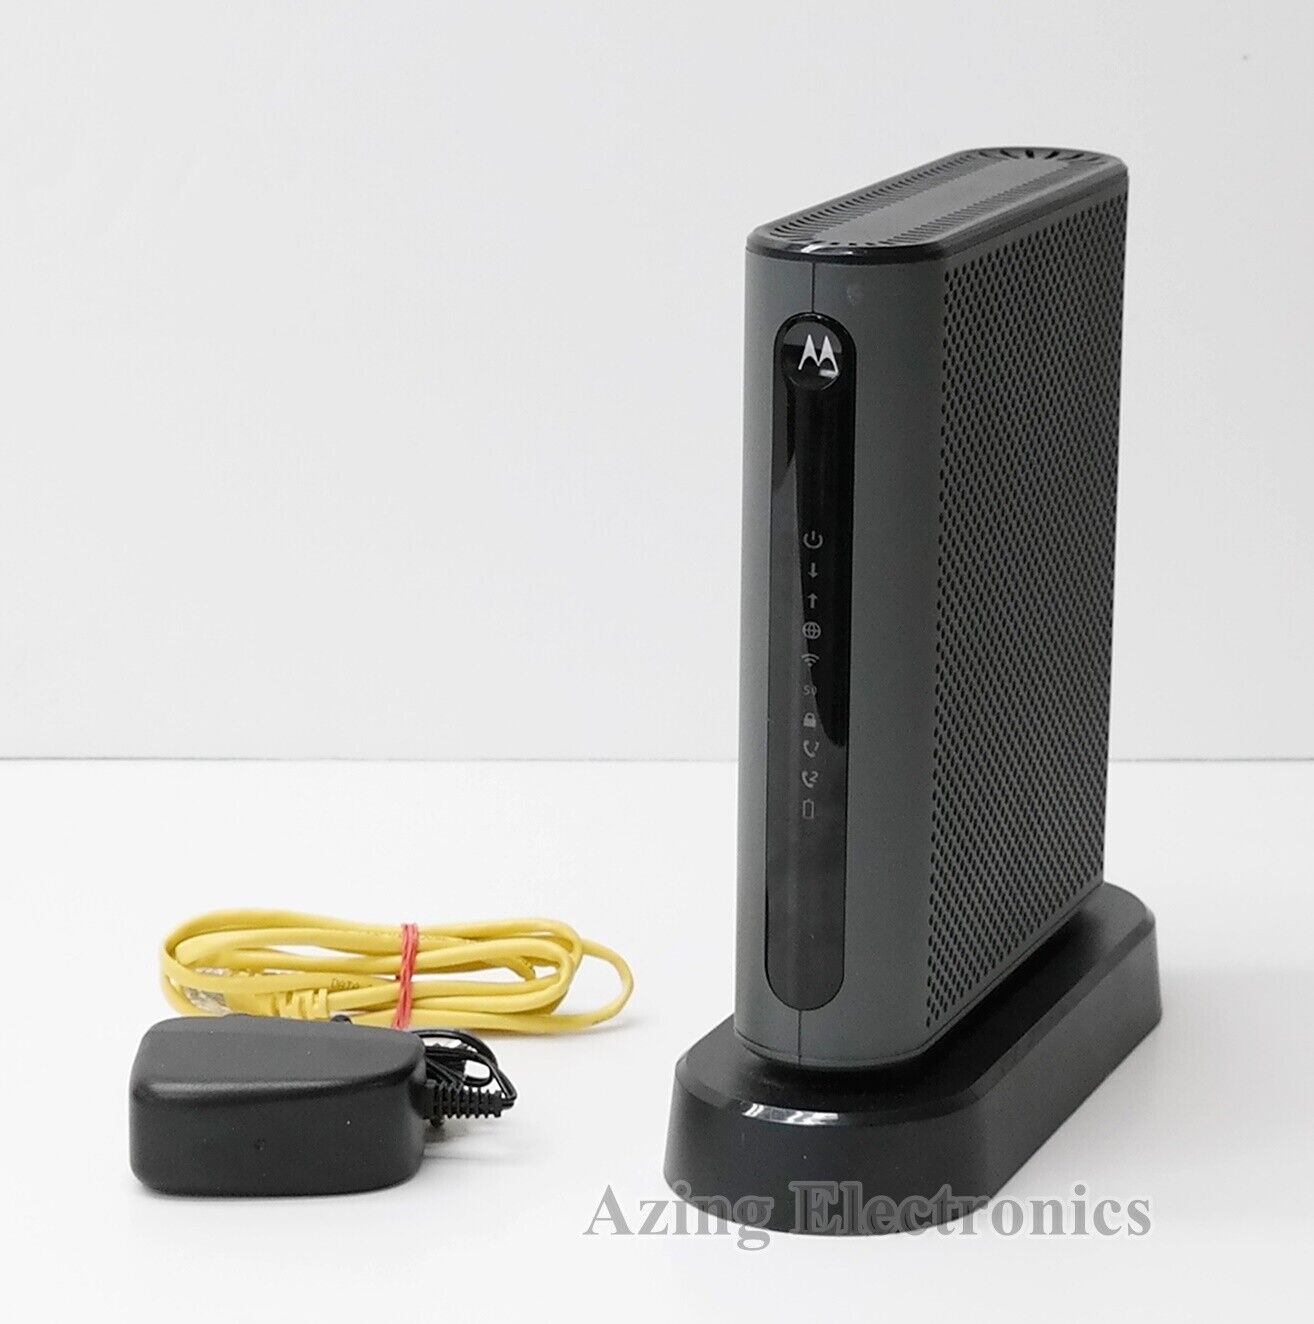 Motorola MT7711 Dual Band AC1900 Cable Modem and Wi-Fi Gigabit Router